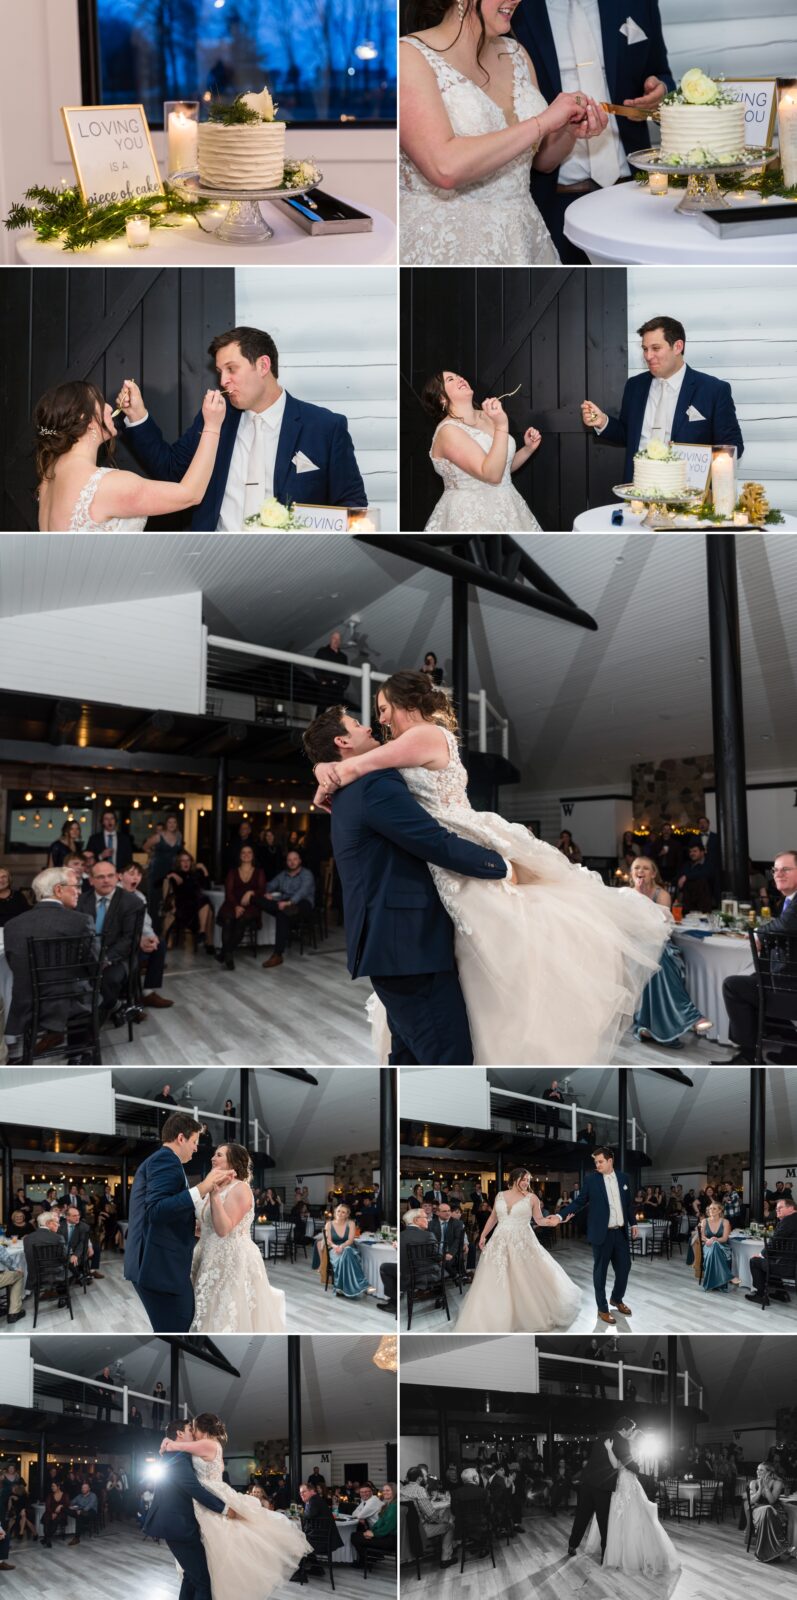 cake cutting and first dances